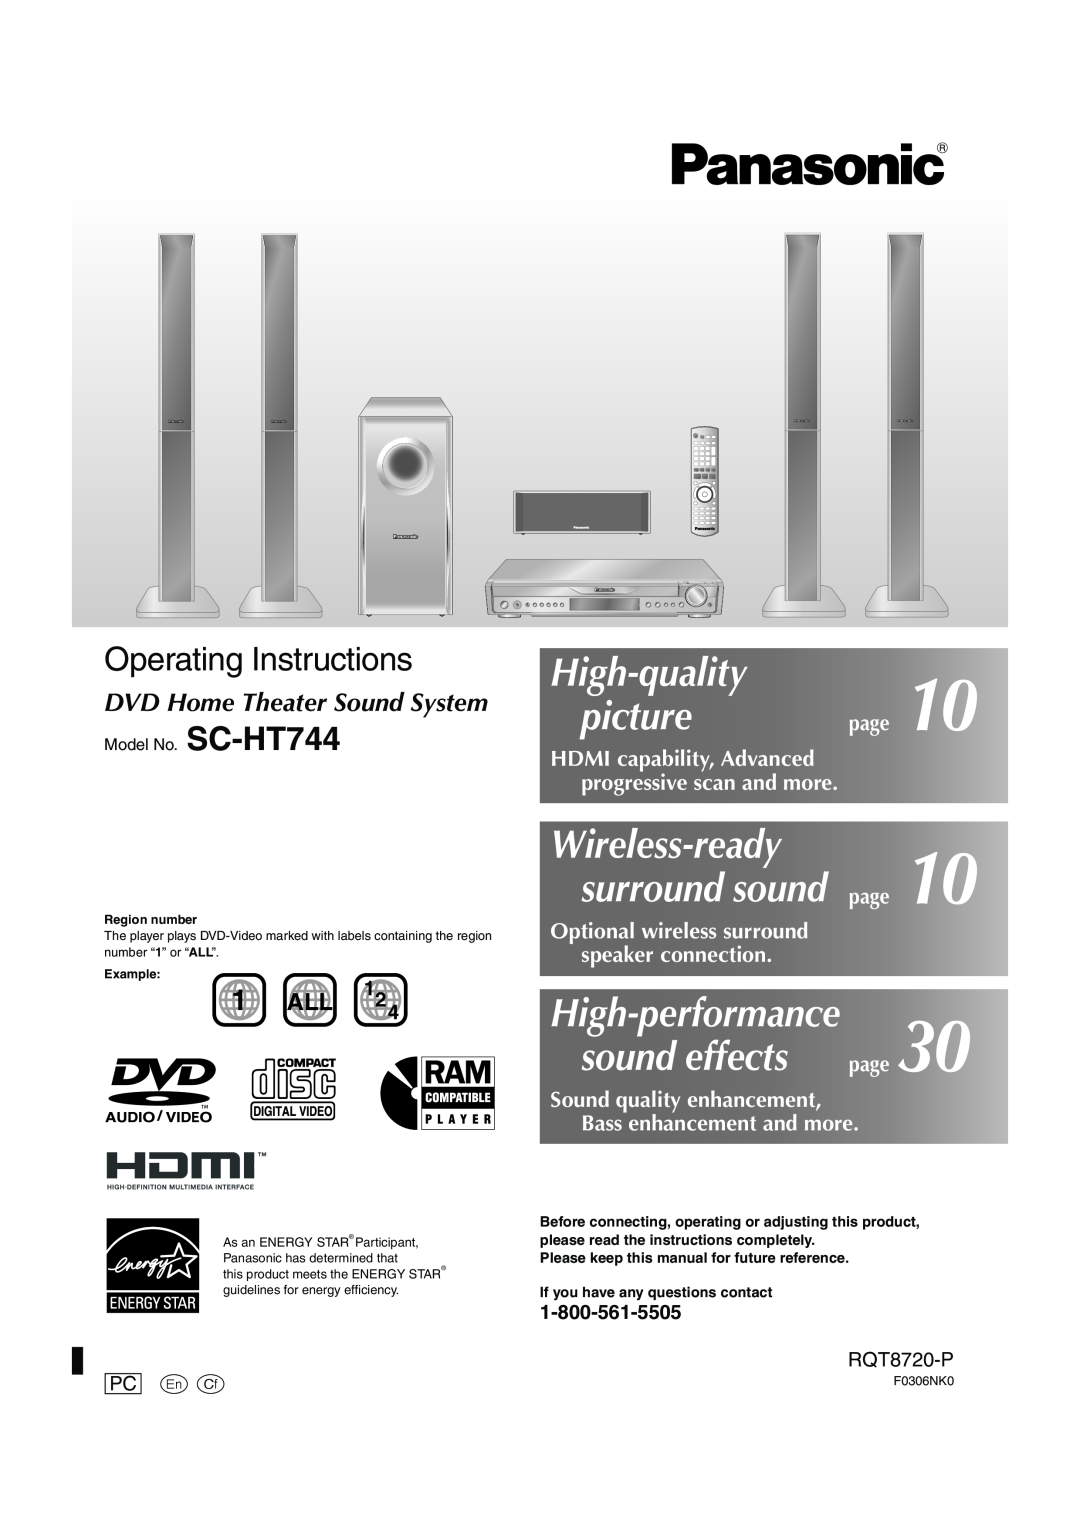 Panasonic SC-HT744 operating instructions High-quality, picture, Wireless-ready, sound effects, surround sound, 1 ALL 